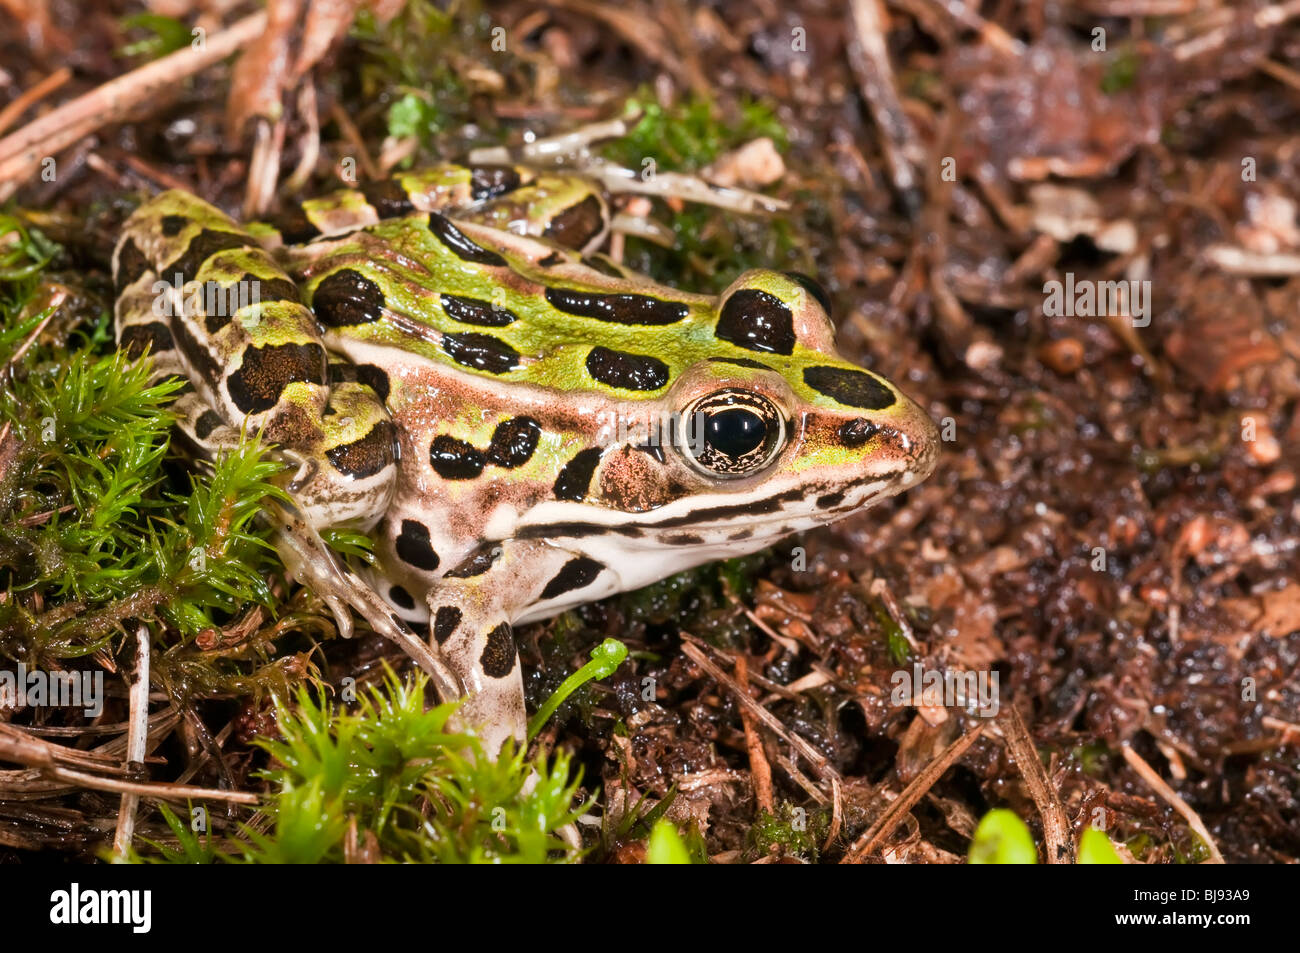 The northern leopard frog, Rana pipiens, is native to parts of Canada and the United States. Stock Photo